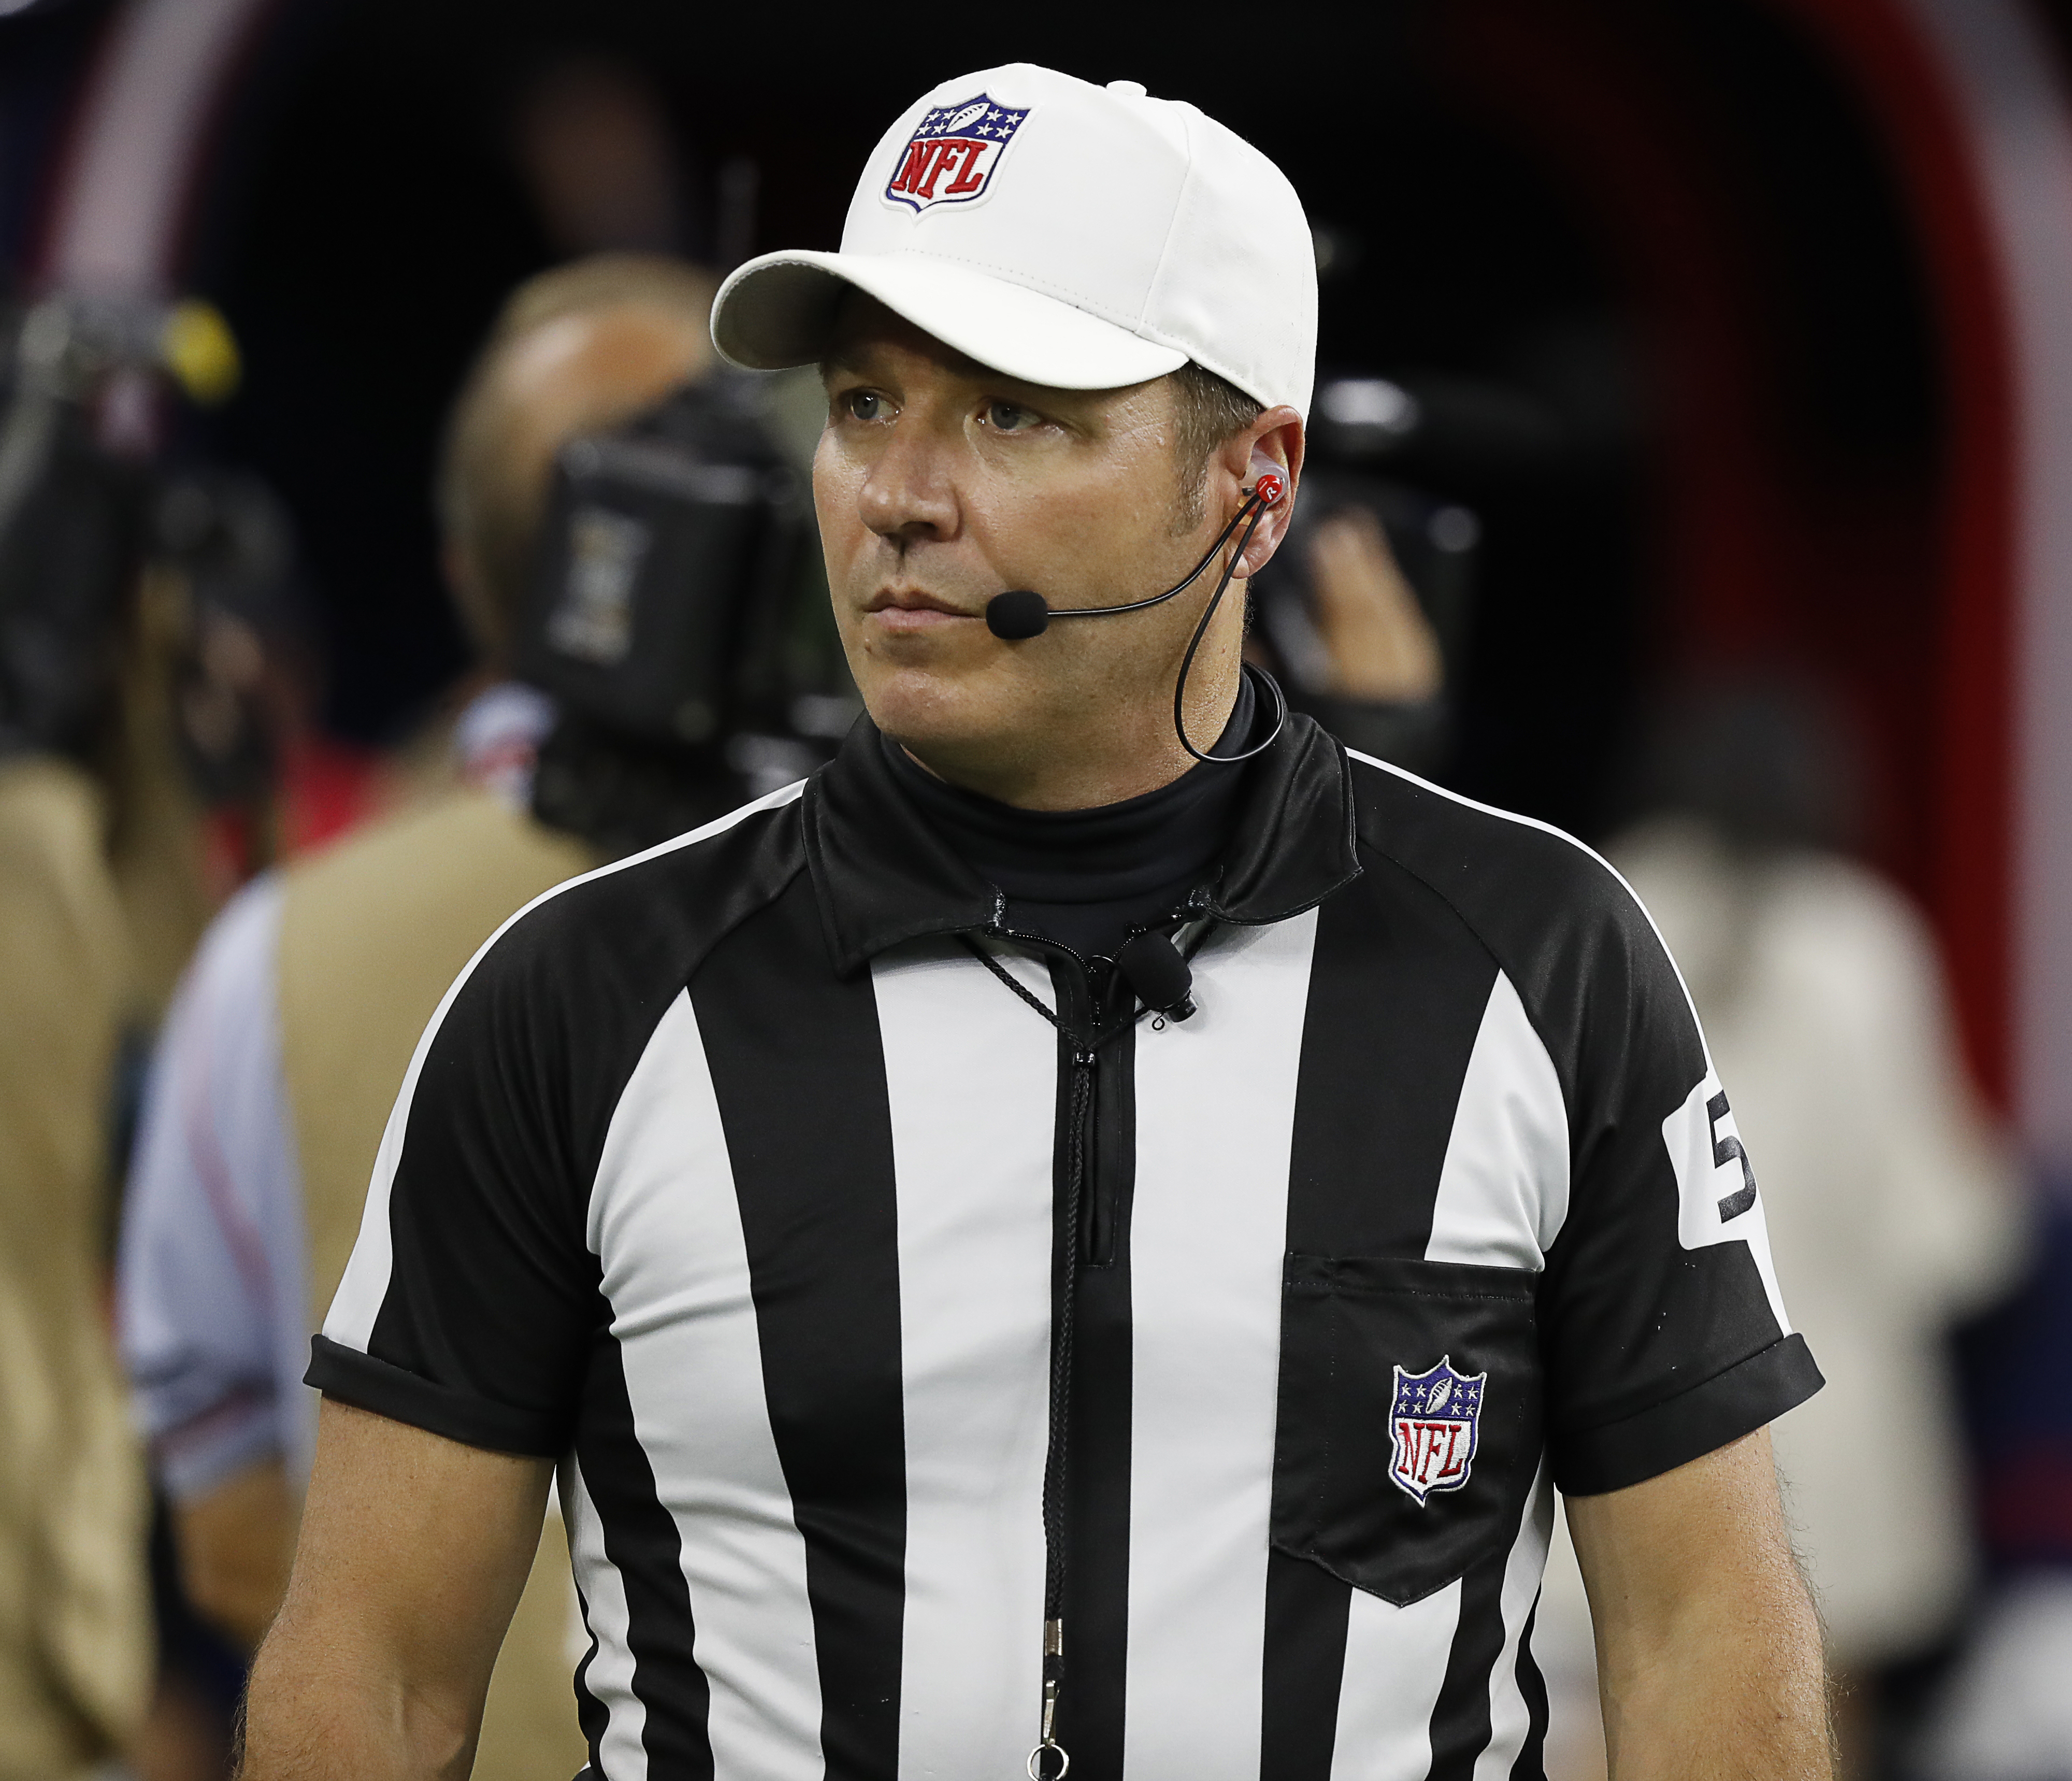 Referee Alex Kemp: Umpire Spotted Football 'Properly' at End of 49ers vs. Cowboy..